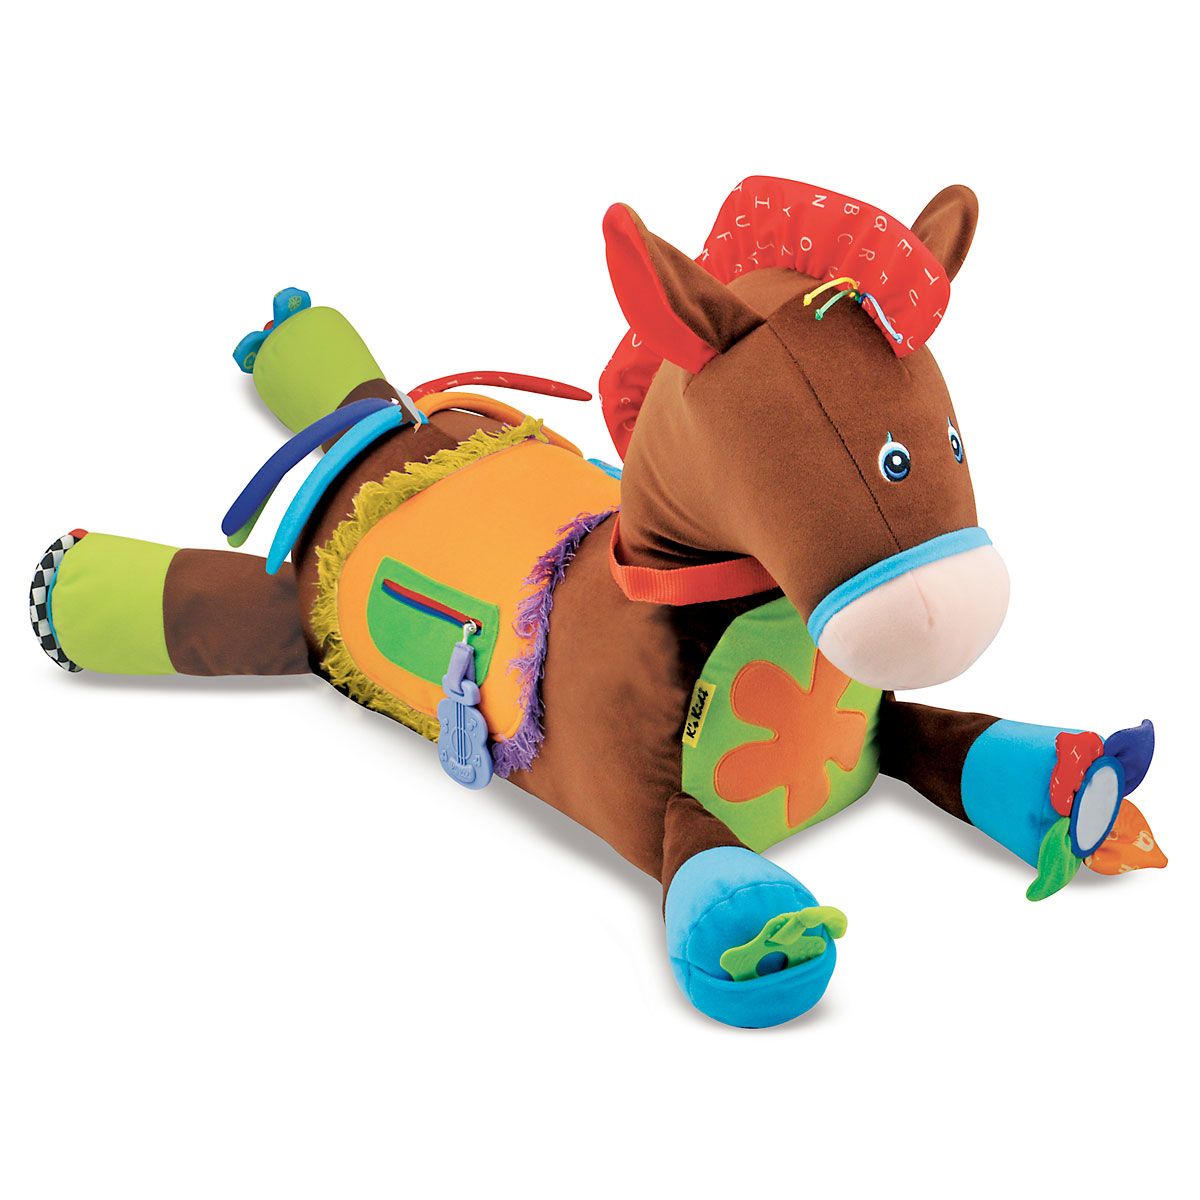 Giddy Up & Play by Melissa & Doug